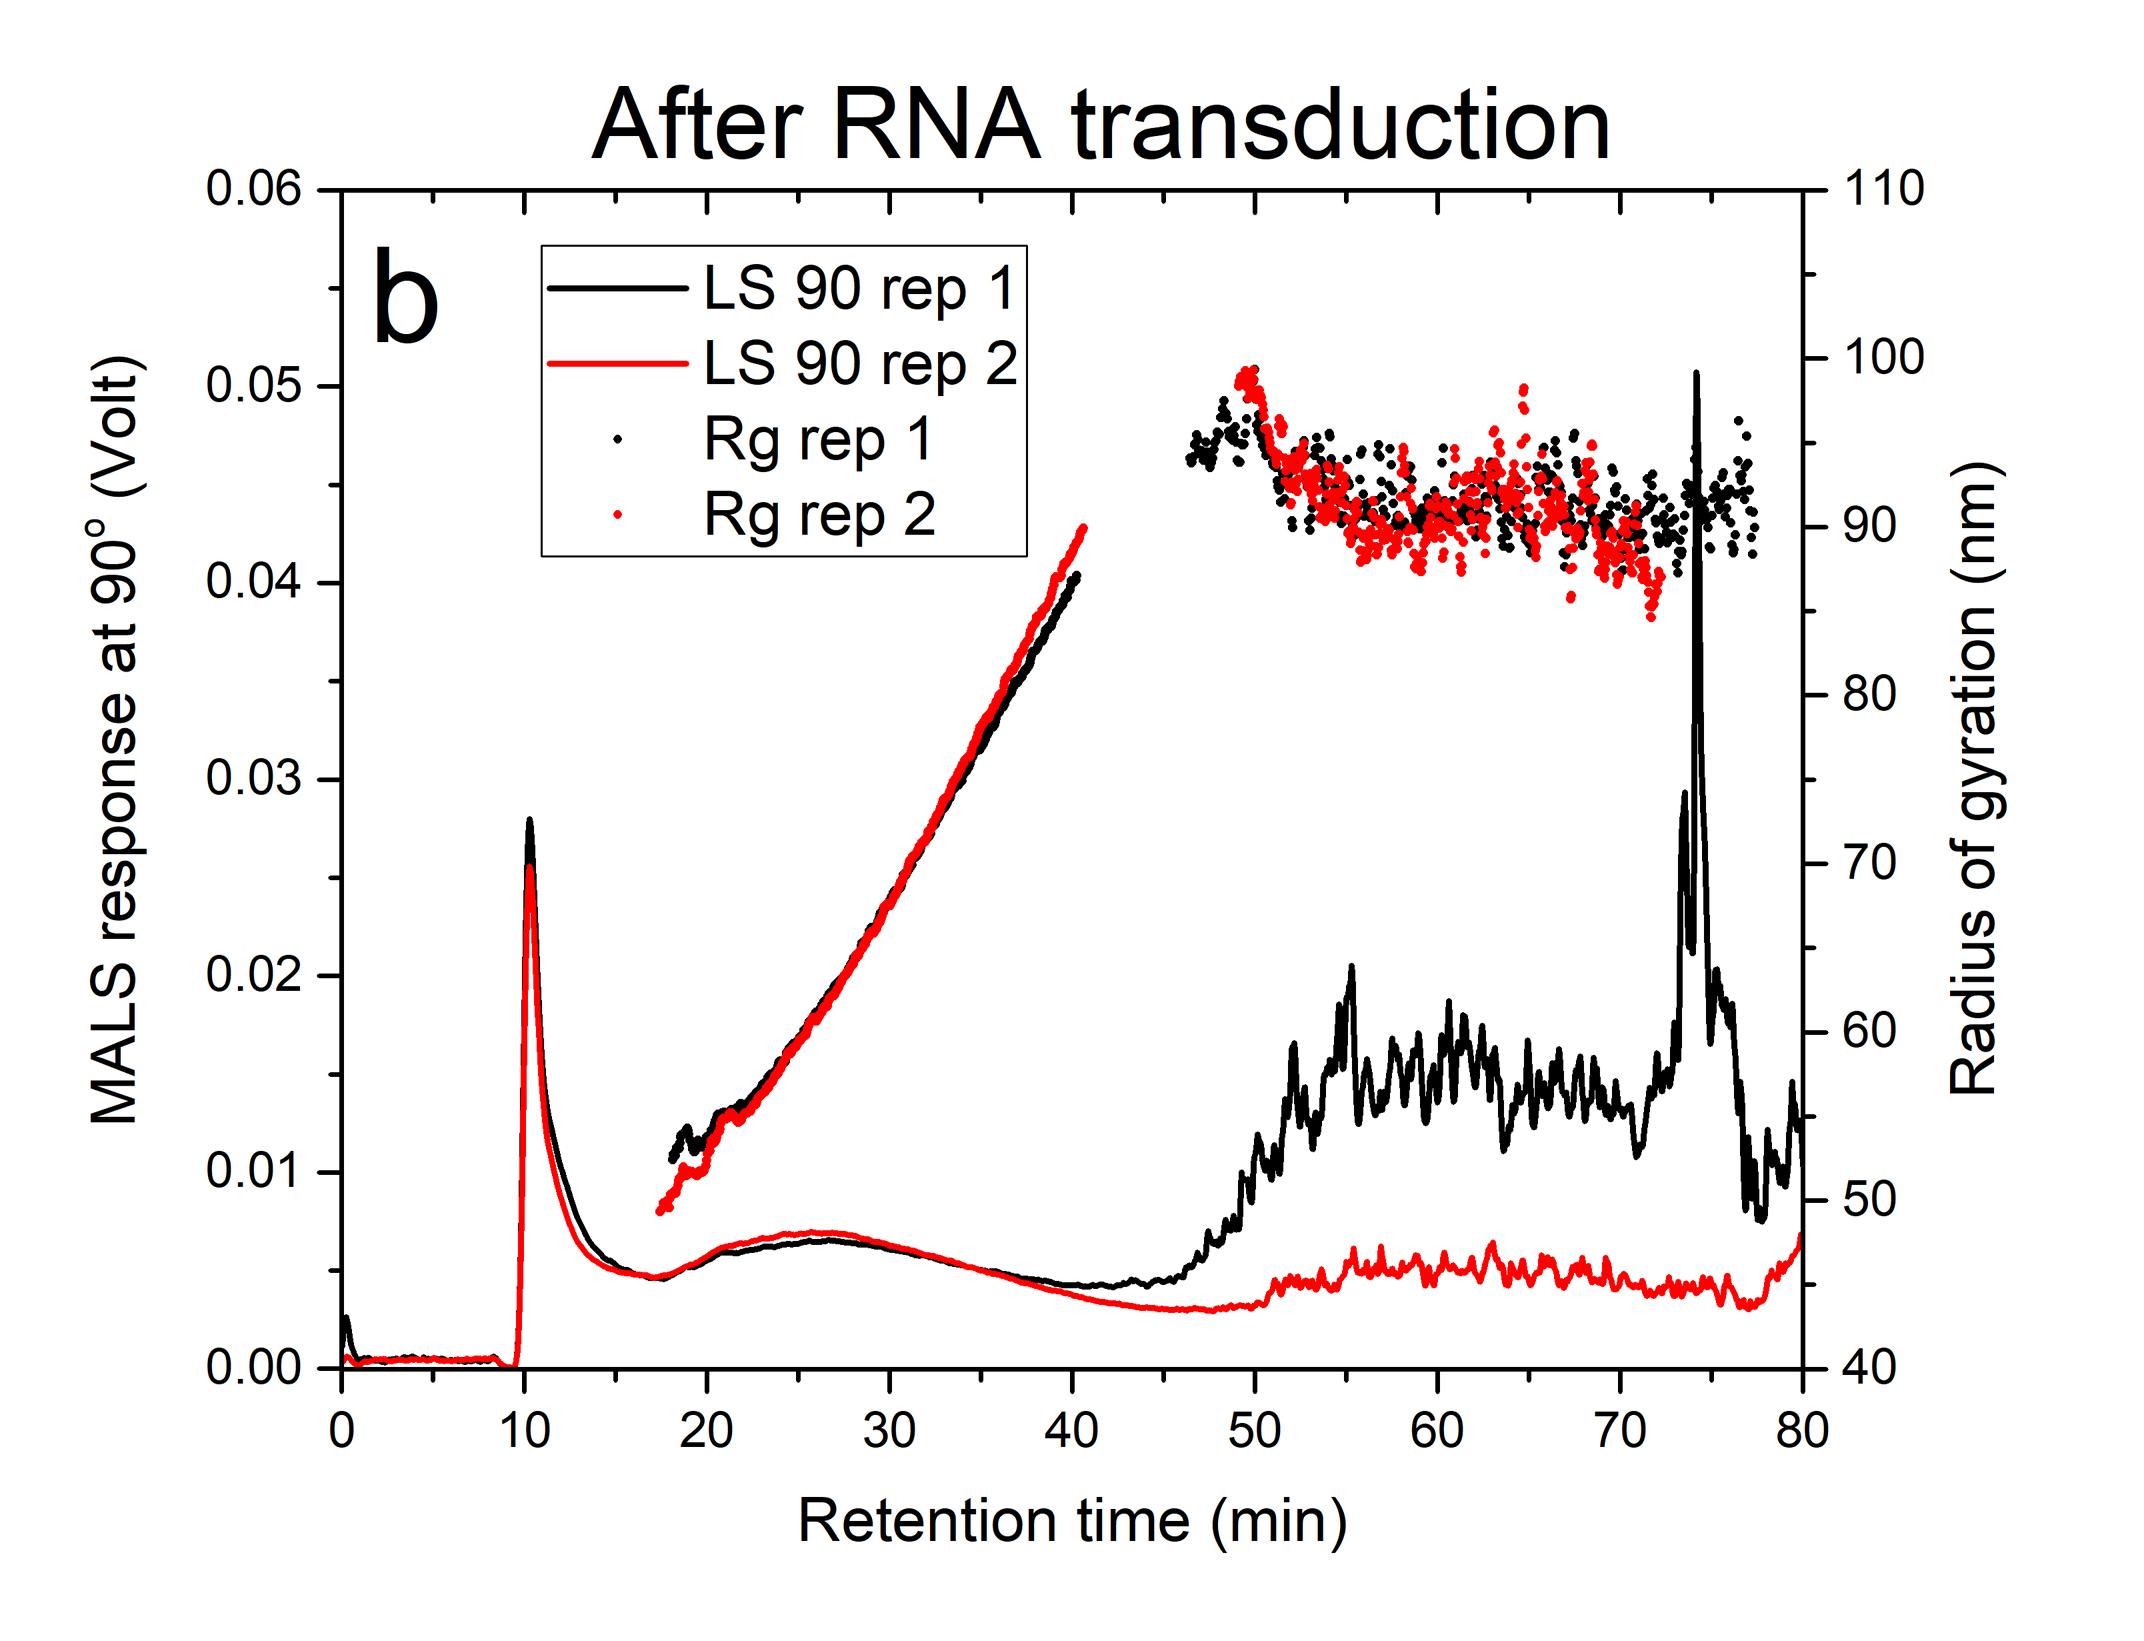 Figure 1. CF3-MALS fractograms and radius of gyration profi les of two replicates for the lentivirus product before (a) and after (b) RNA transduction. The solid lines represent the response of the MALS detector at 90°. The solid circles represent radius of gyration, Rg.